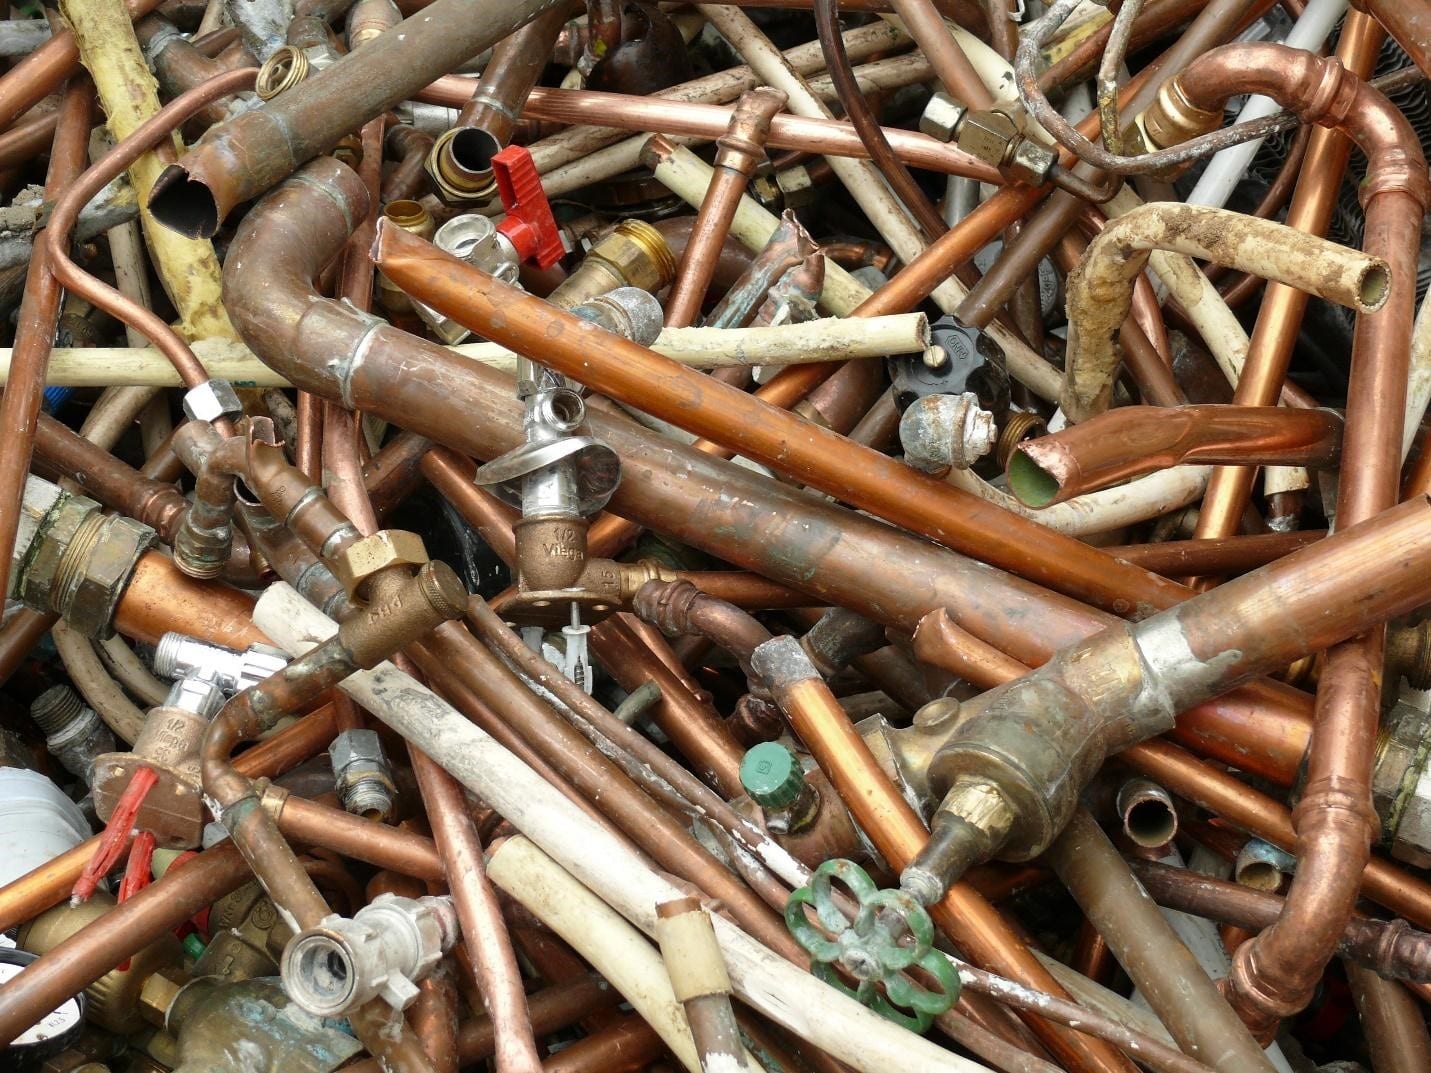 Have you ever wondered how scrap gets recycled